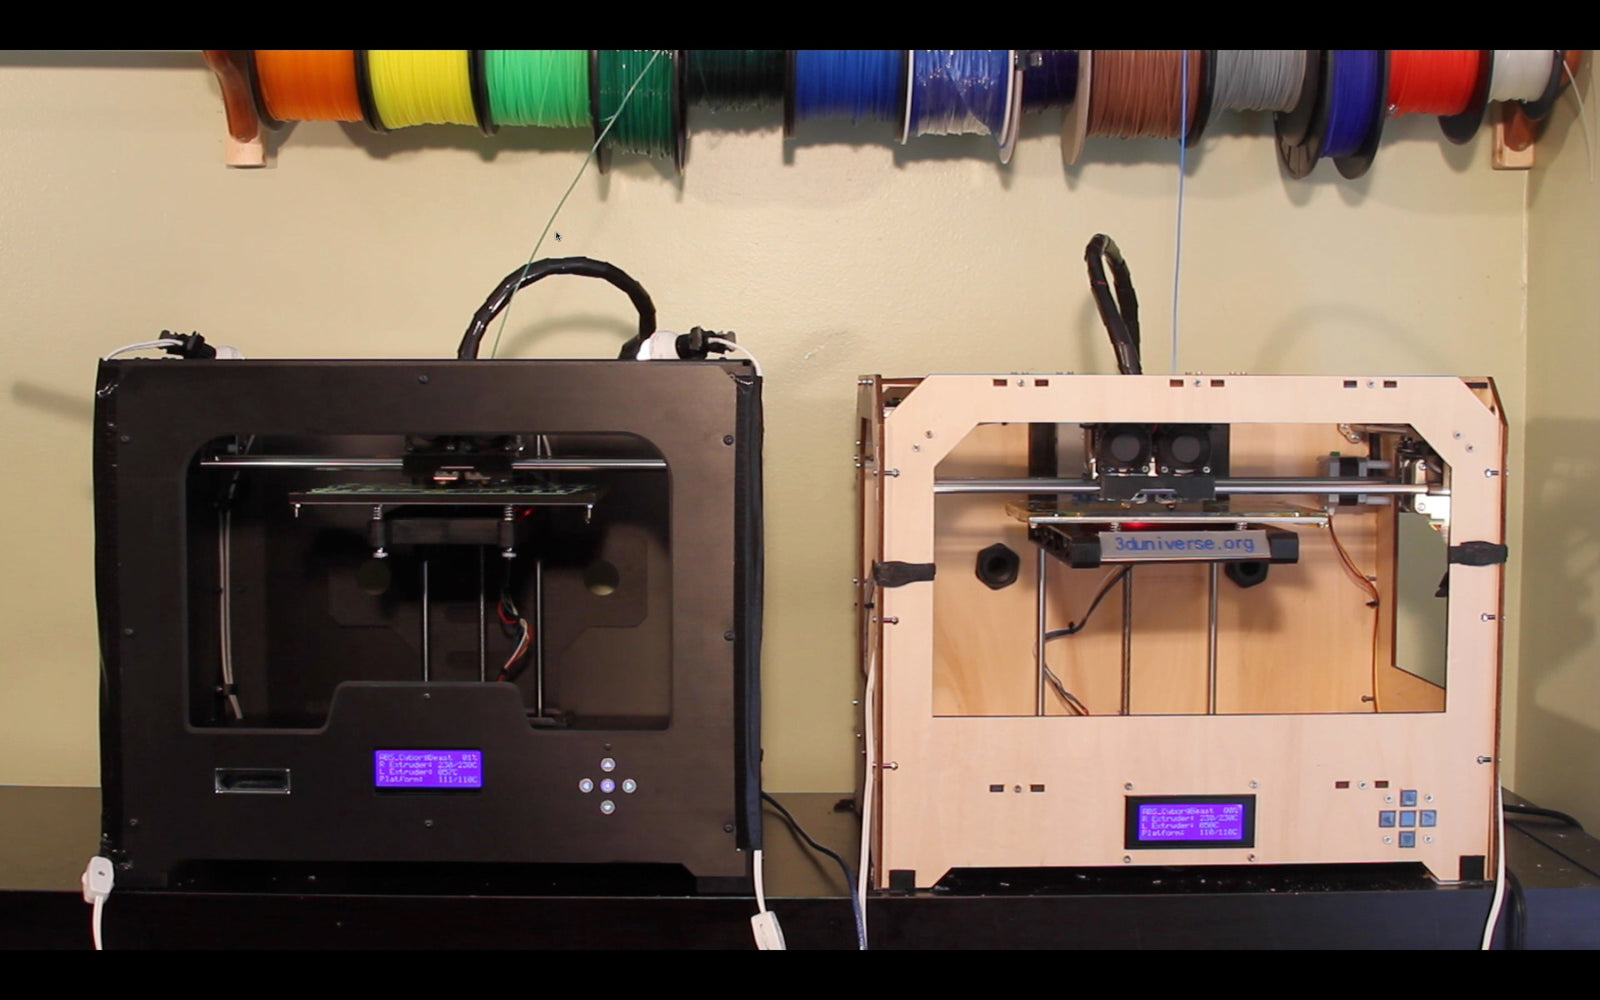 Beginner's Guide to 3D Printing